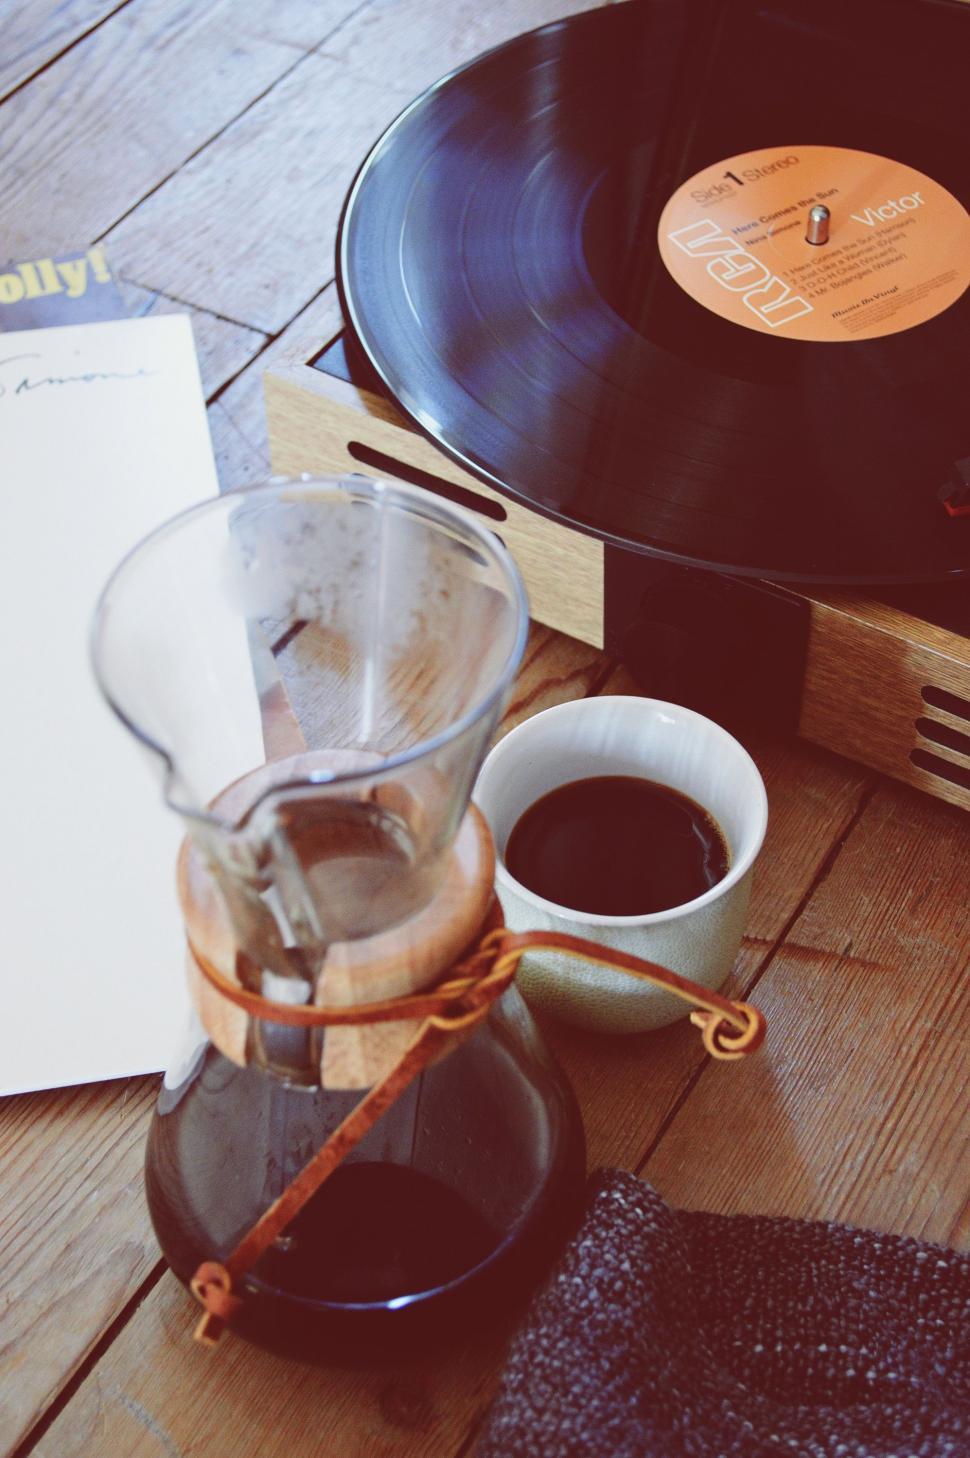 Free Image of Record Player and Cup of Coffee on Table 